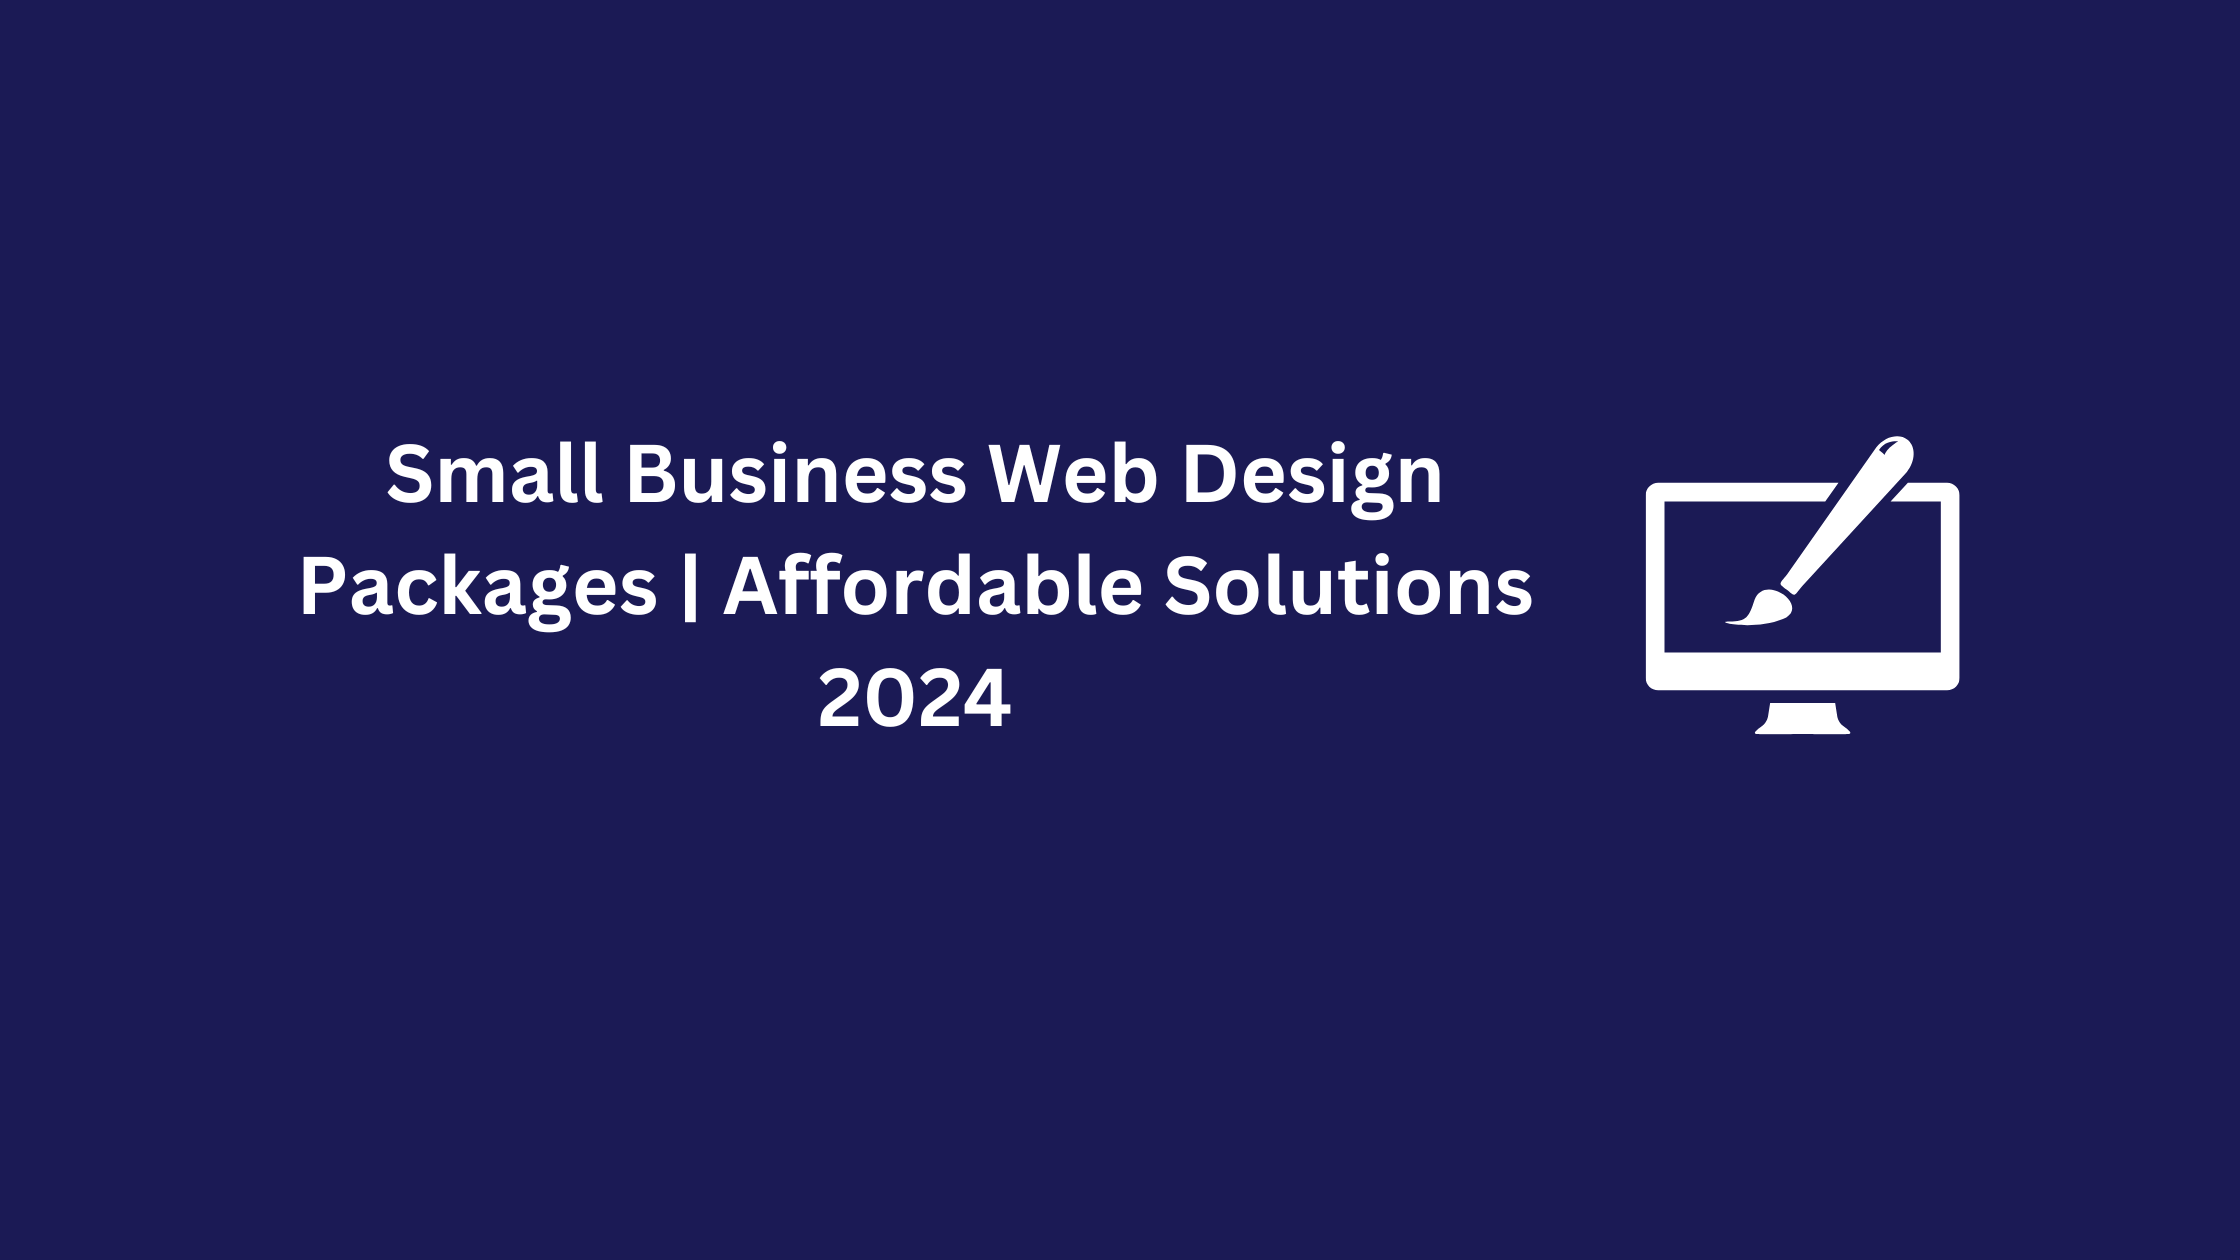 Small Business Web Design Packages | Affordable Solutions 2024